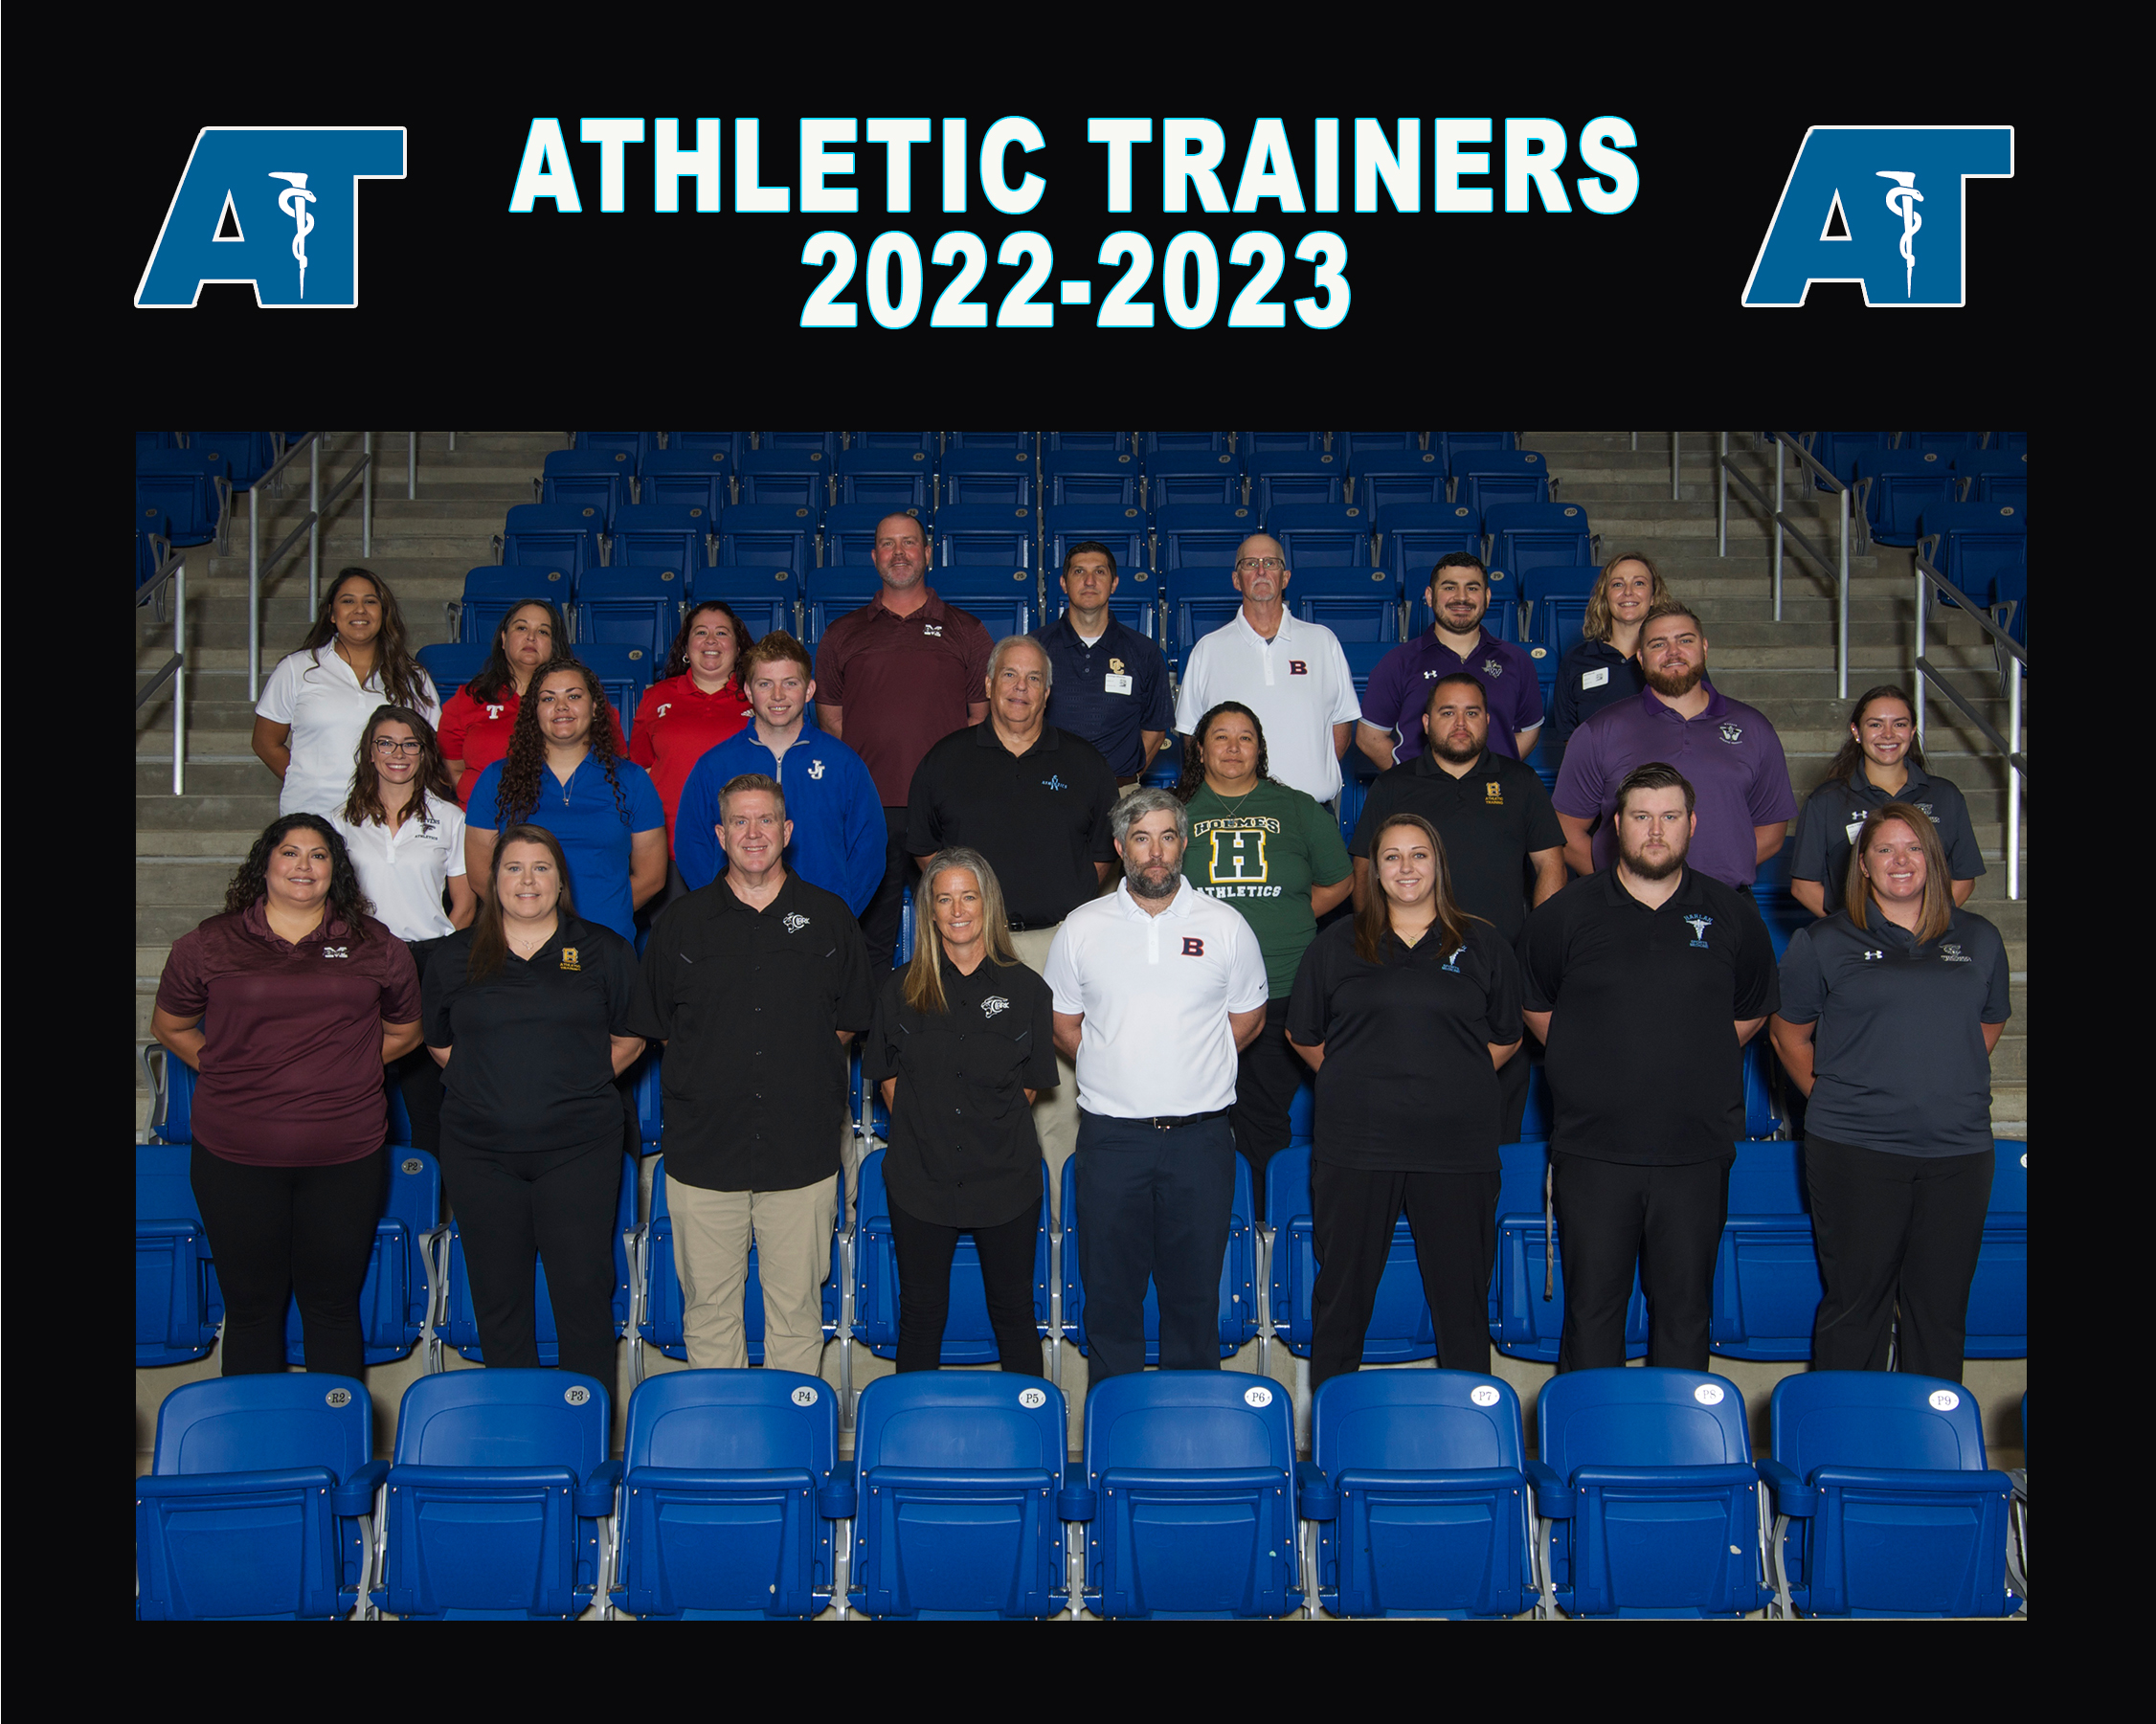 2022-2023 Trainers